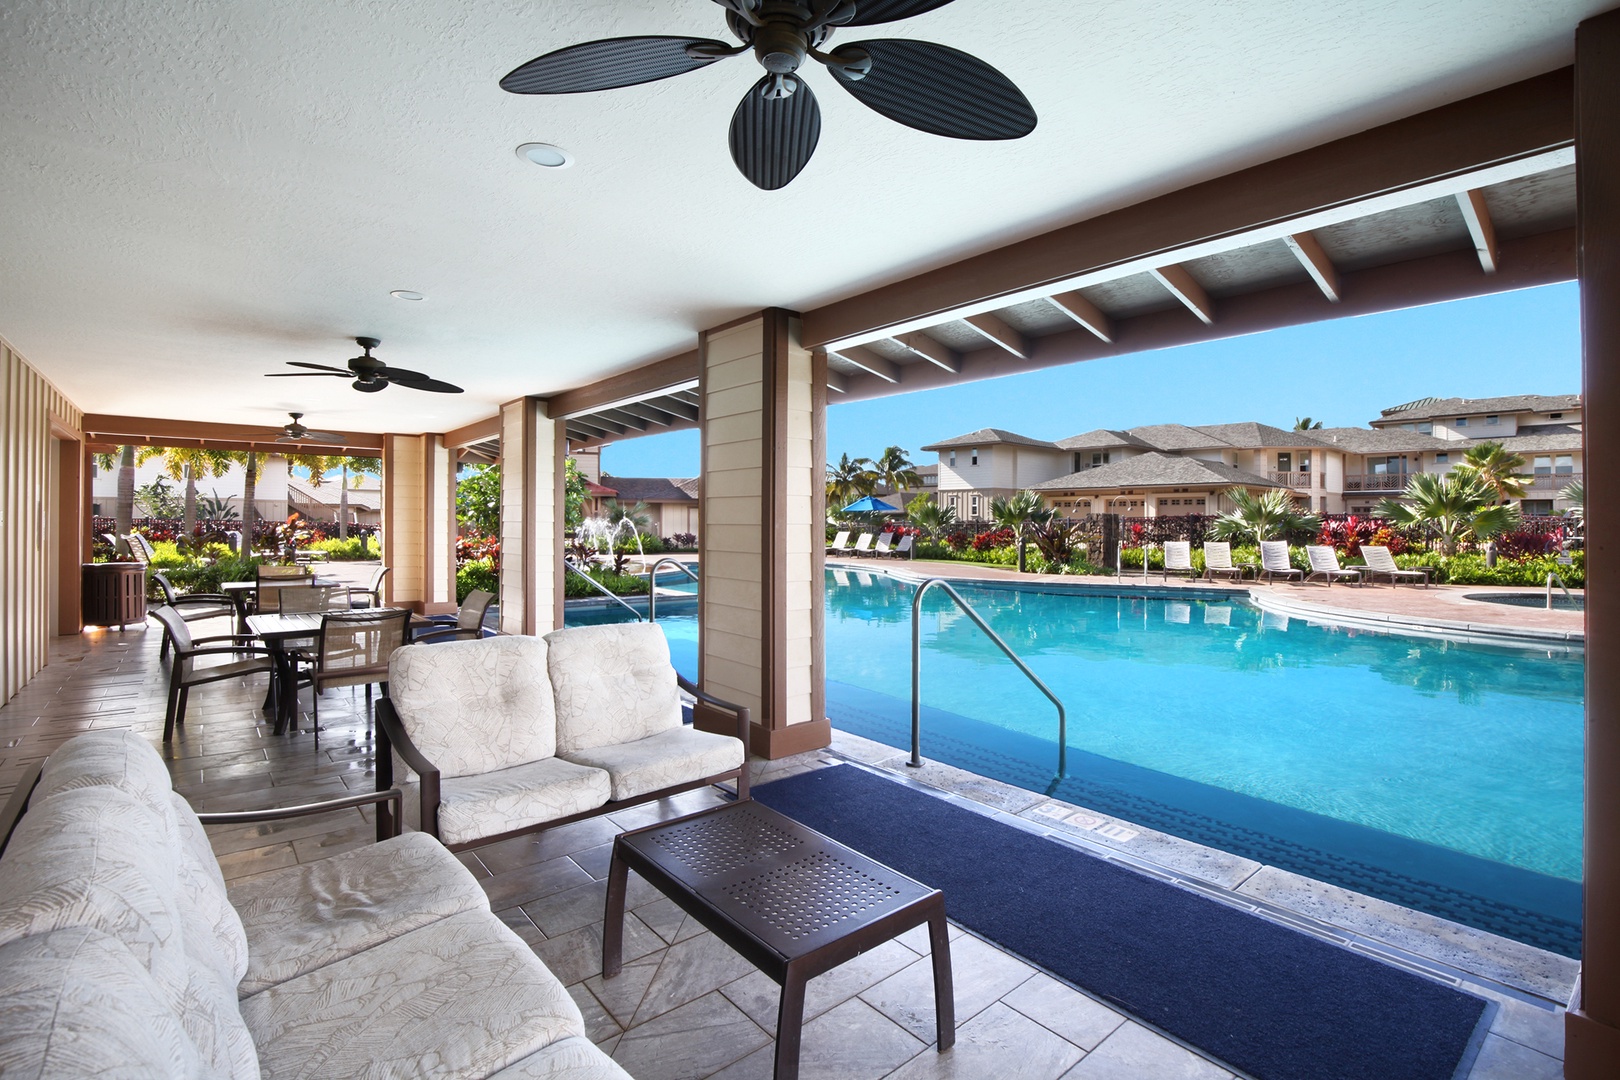 Koloa Vacation Rentals, Pili Mai 15G - Located on the beautiful Kiahuna Golf Course, this exceptional, newly constructed two-bedroom, two-bath condo boasts central air conditioning and accommodates up to six people